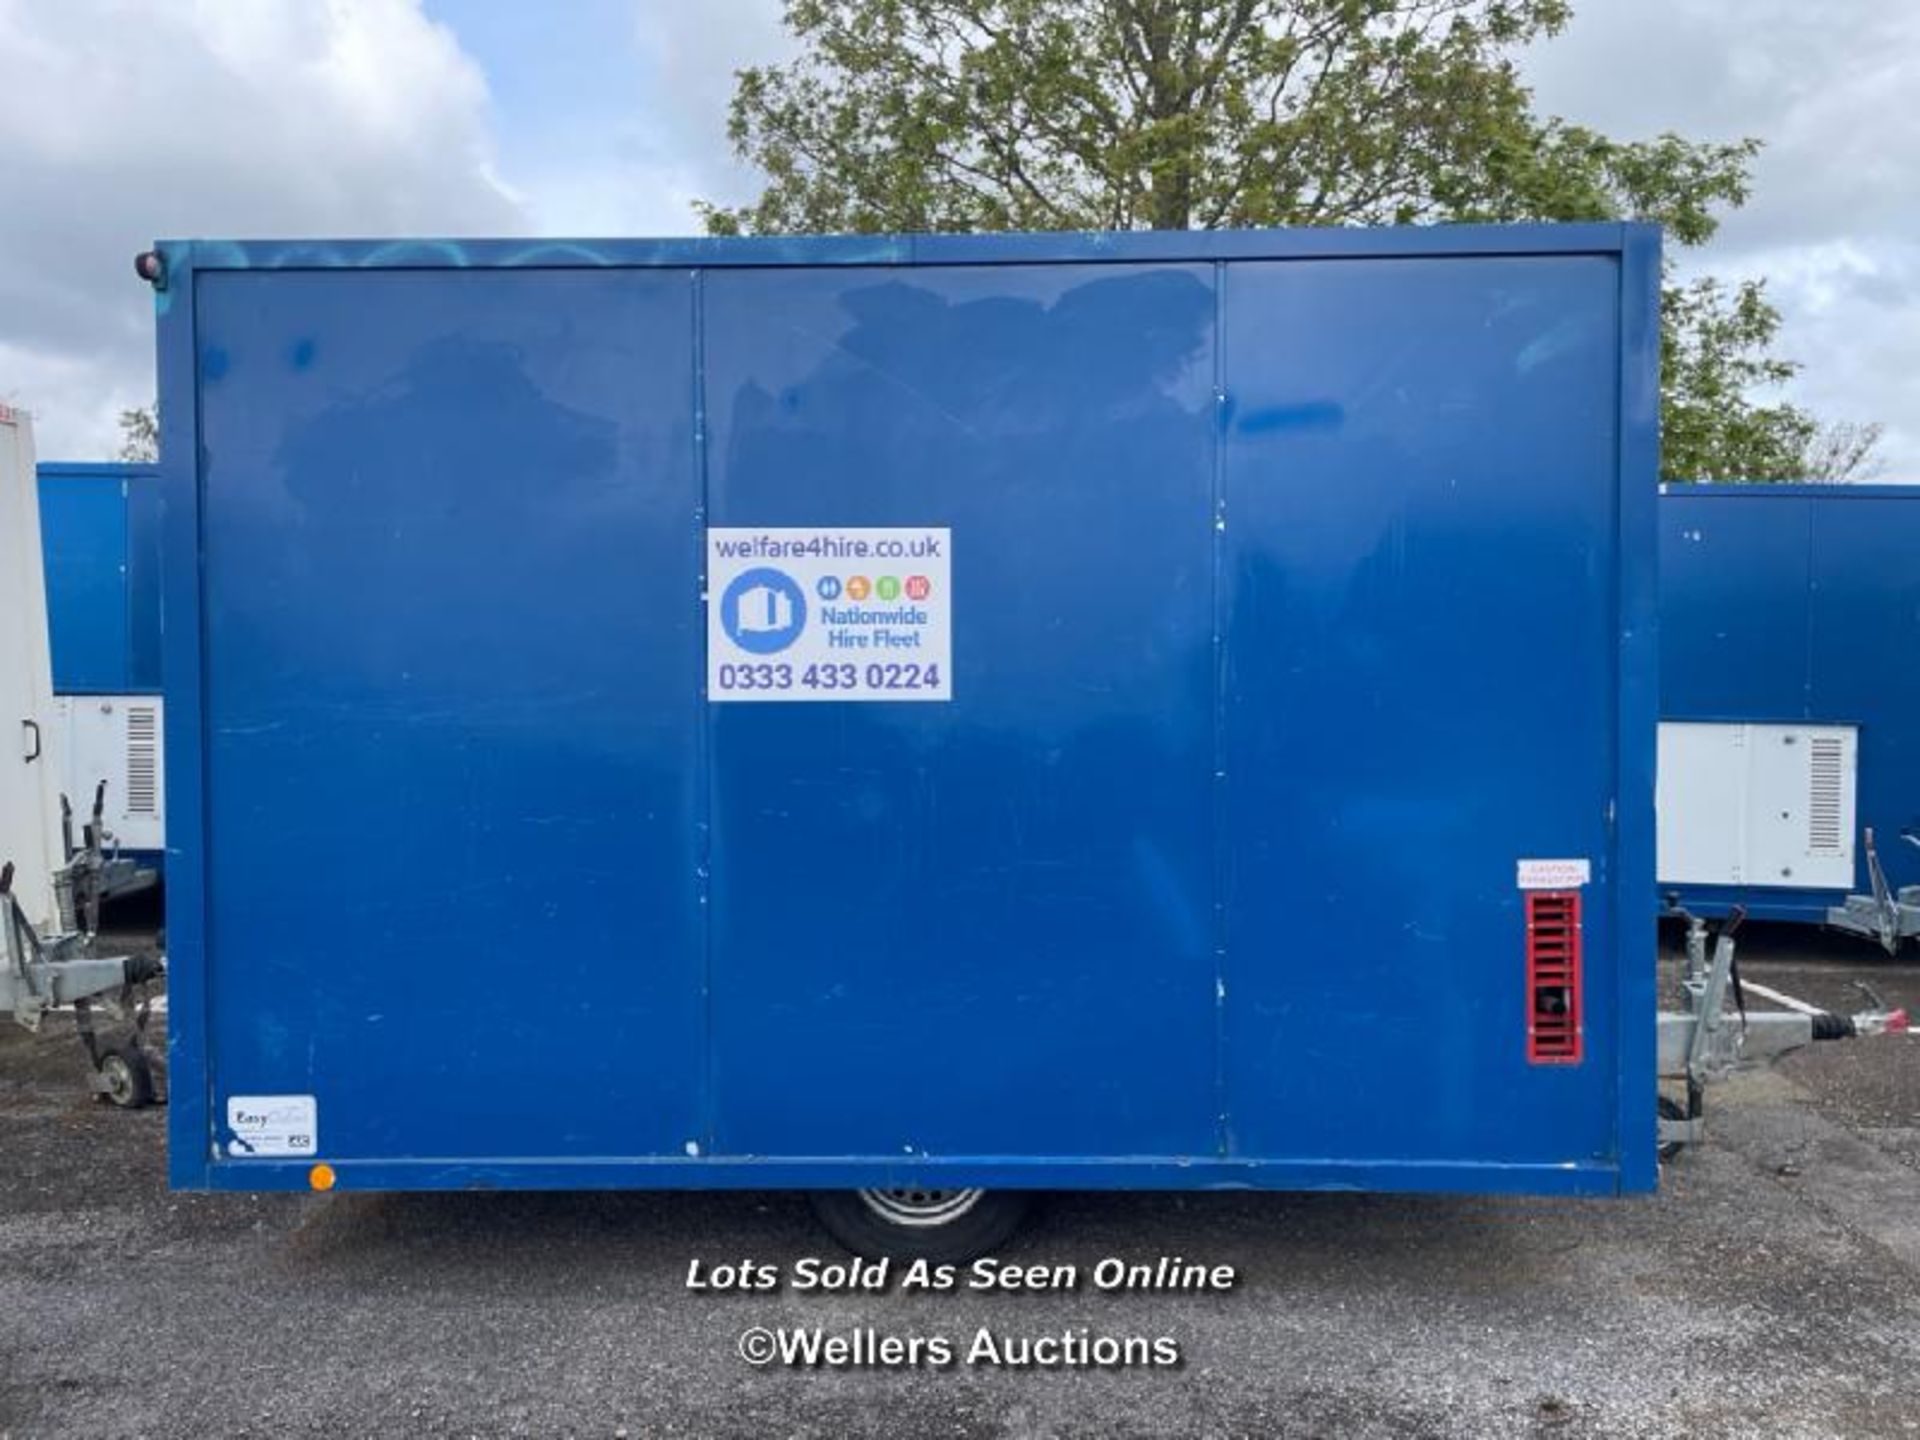 6 PERSON 12 X 7.5FT AJC EASY CABIN TOWABLE WELFARE UNIT, INCLUDES WASH BASIN, KETTLE, MICROWAVE, - Image 5 of 19